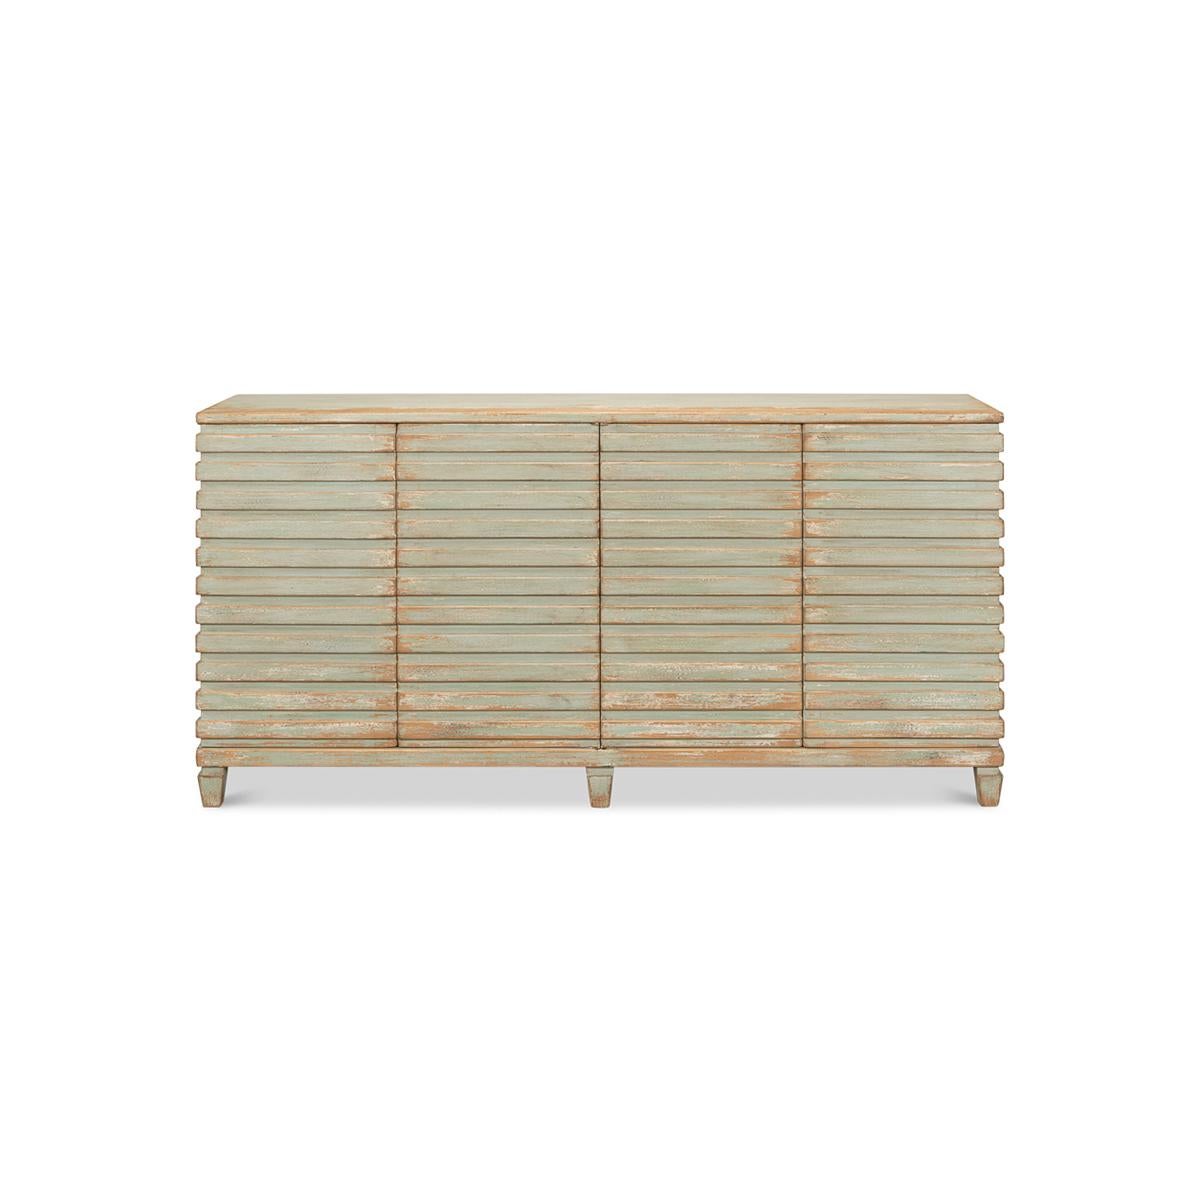 Modern ribbed sideboard of pine in an antiqued hand-rubbed sage green finish. The buffet cabinet with four doors and interior shelves and a geometric ribbed design that wraps around each side, with square tapered legs.

Dimensions: 72